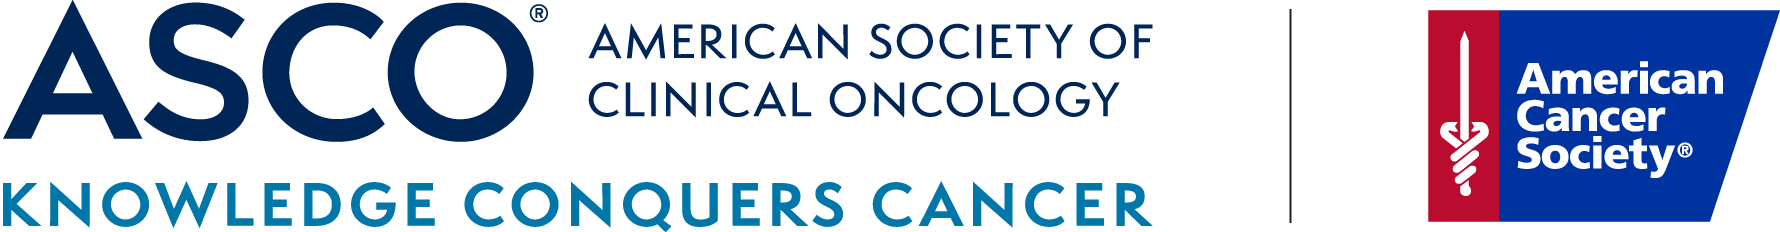 ASCO ® American Society of Clinical Oncology; Knowledge Conquers Cancer; American Cancer Society ®